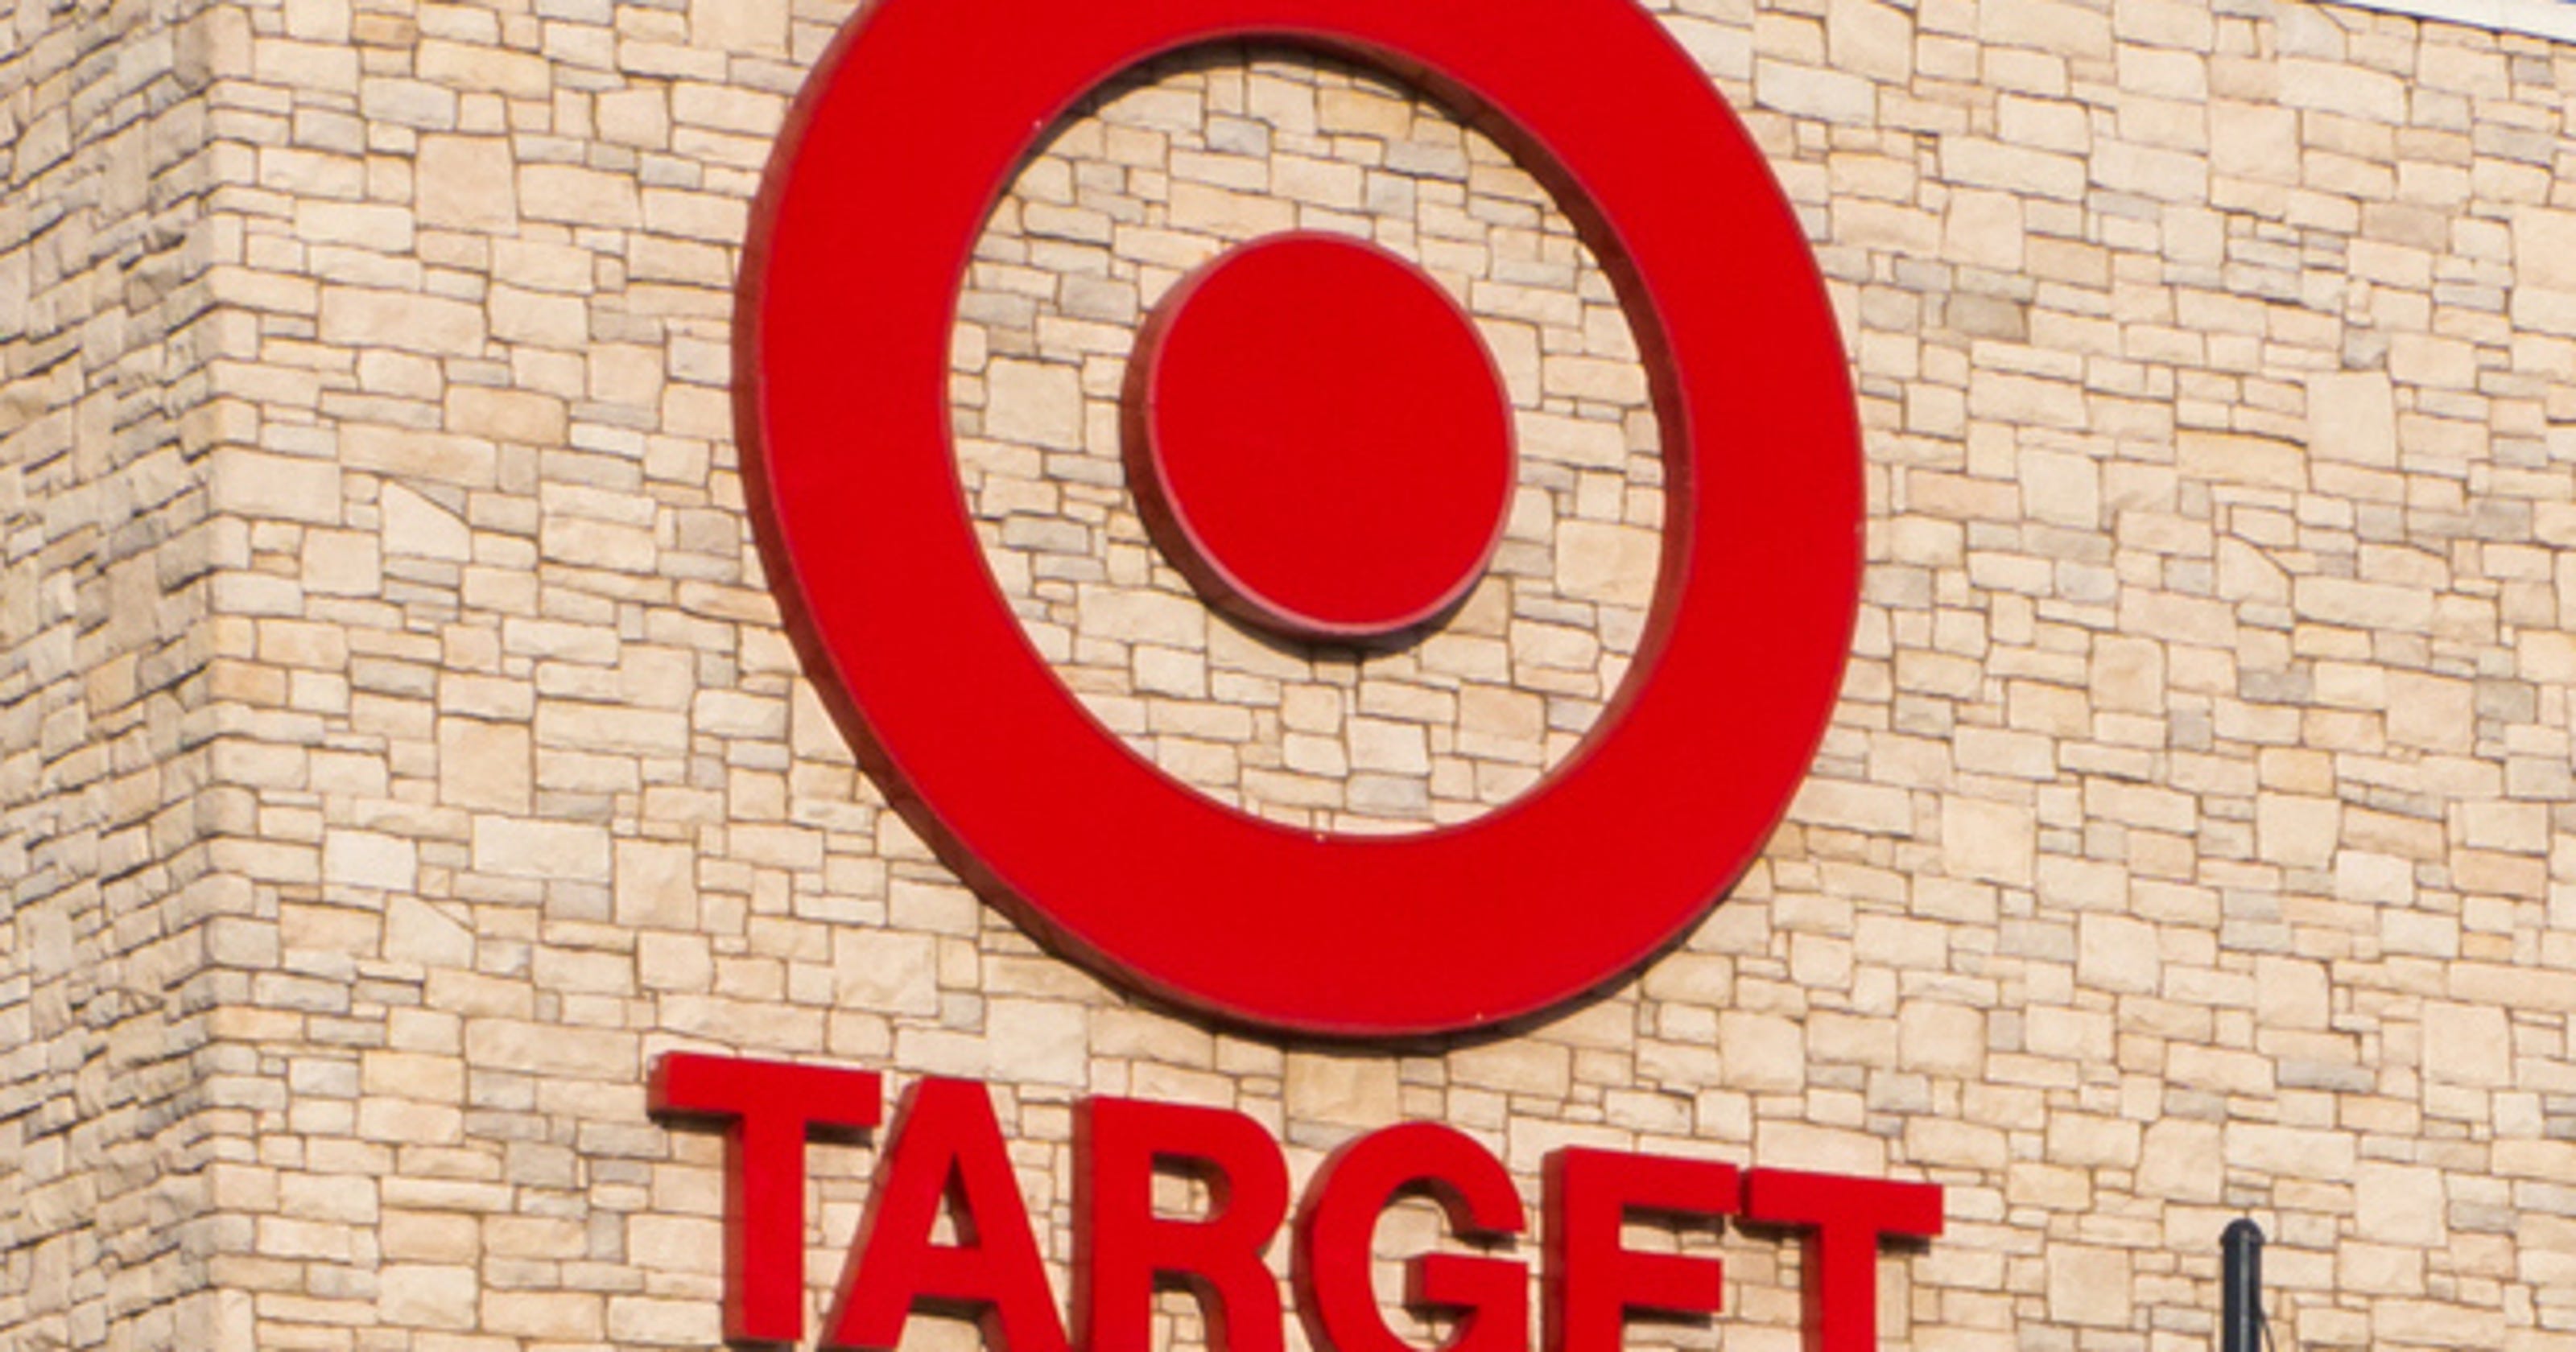 Black Friday deals: Target Black Friday ad full of deals on electronics, toys